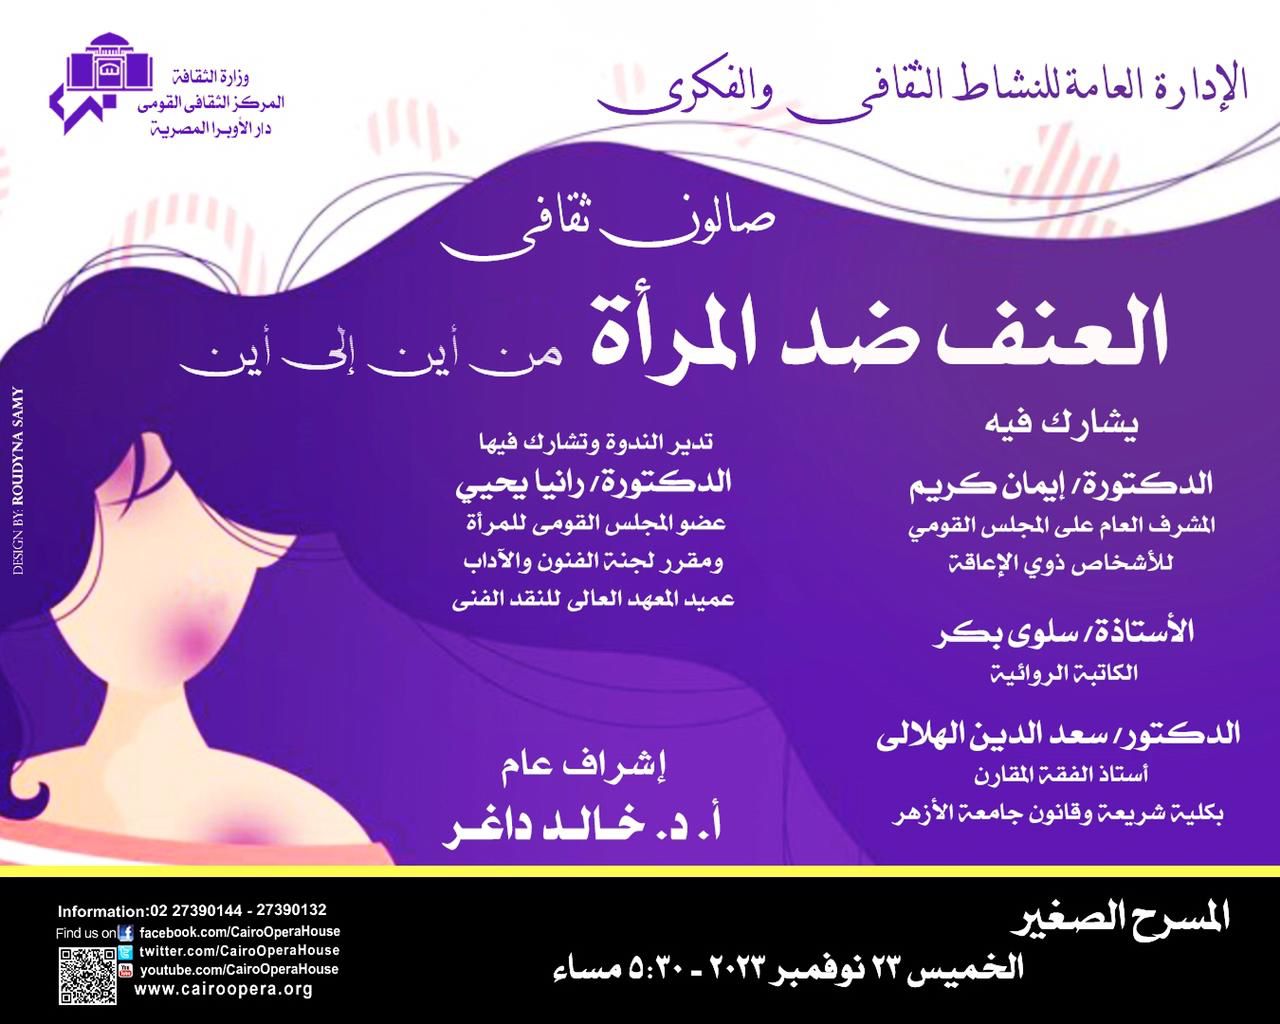 Cultural Salon Titled “Violence Against Women” at Cairo Opera House